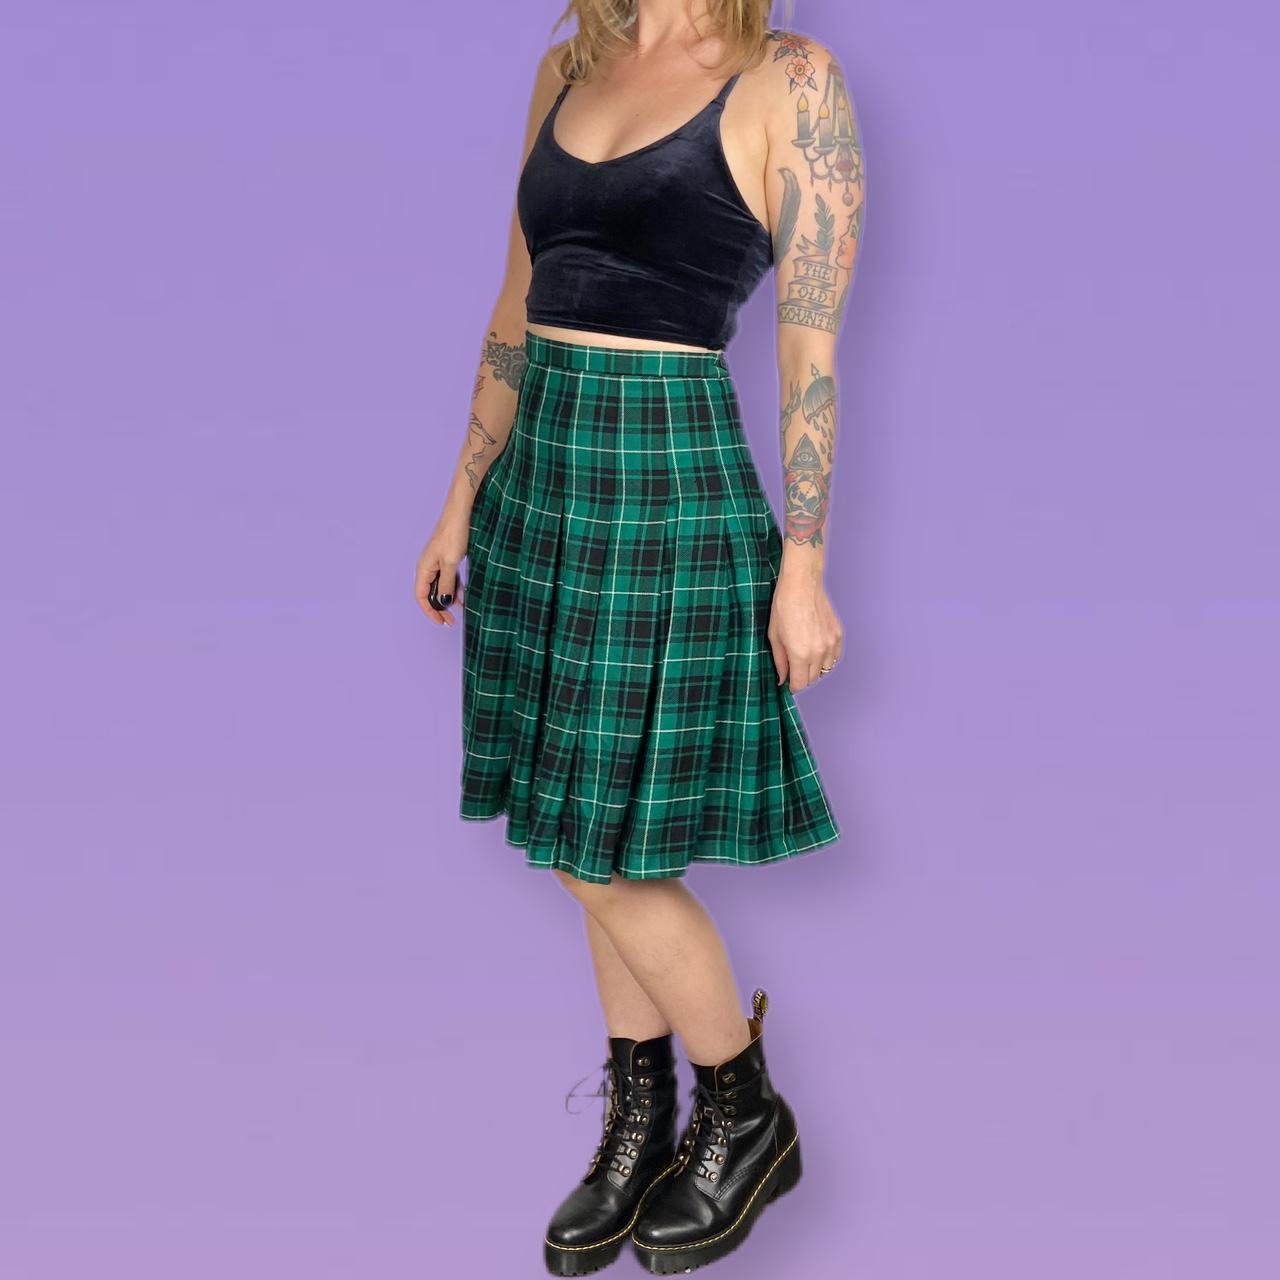 Product Image 1 - Green plaid skirt by Pendleton!